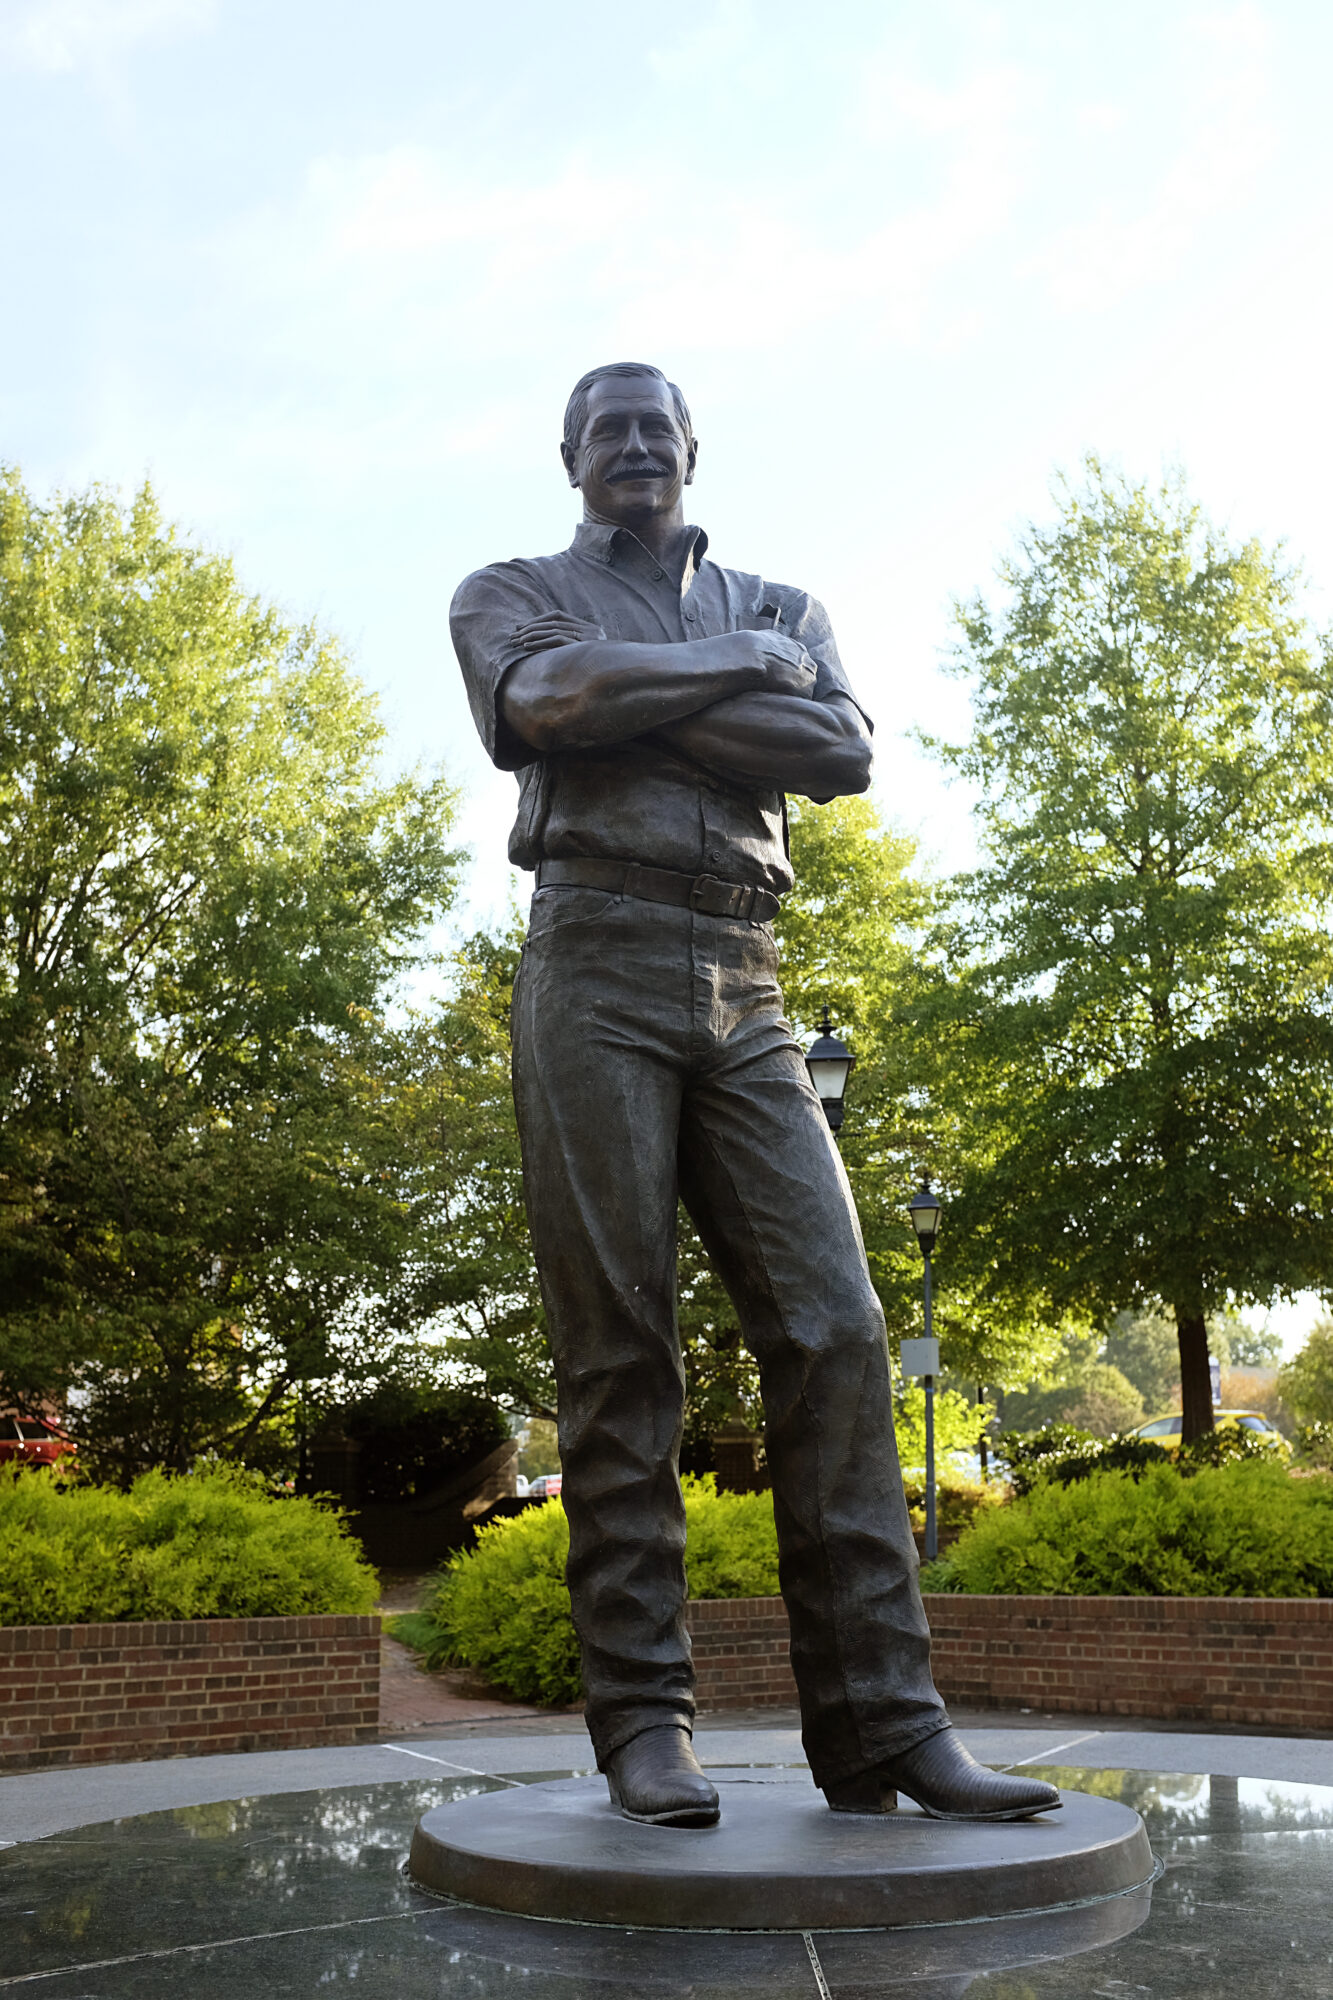 A statue of Dale Earnhardt in Kannapolis